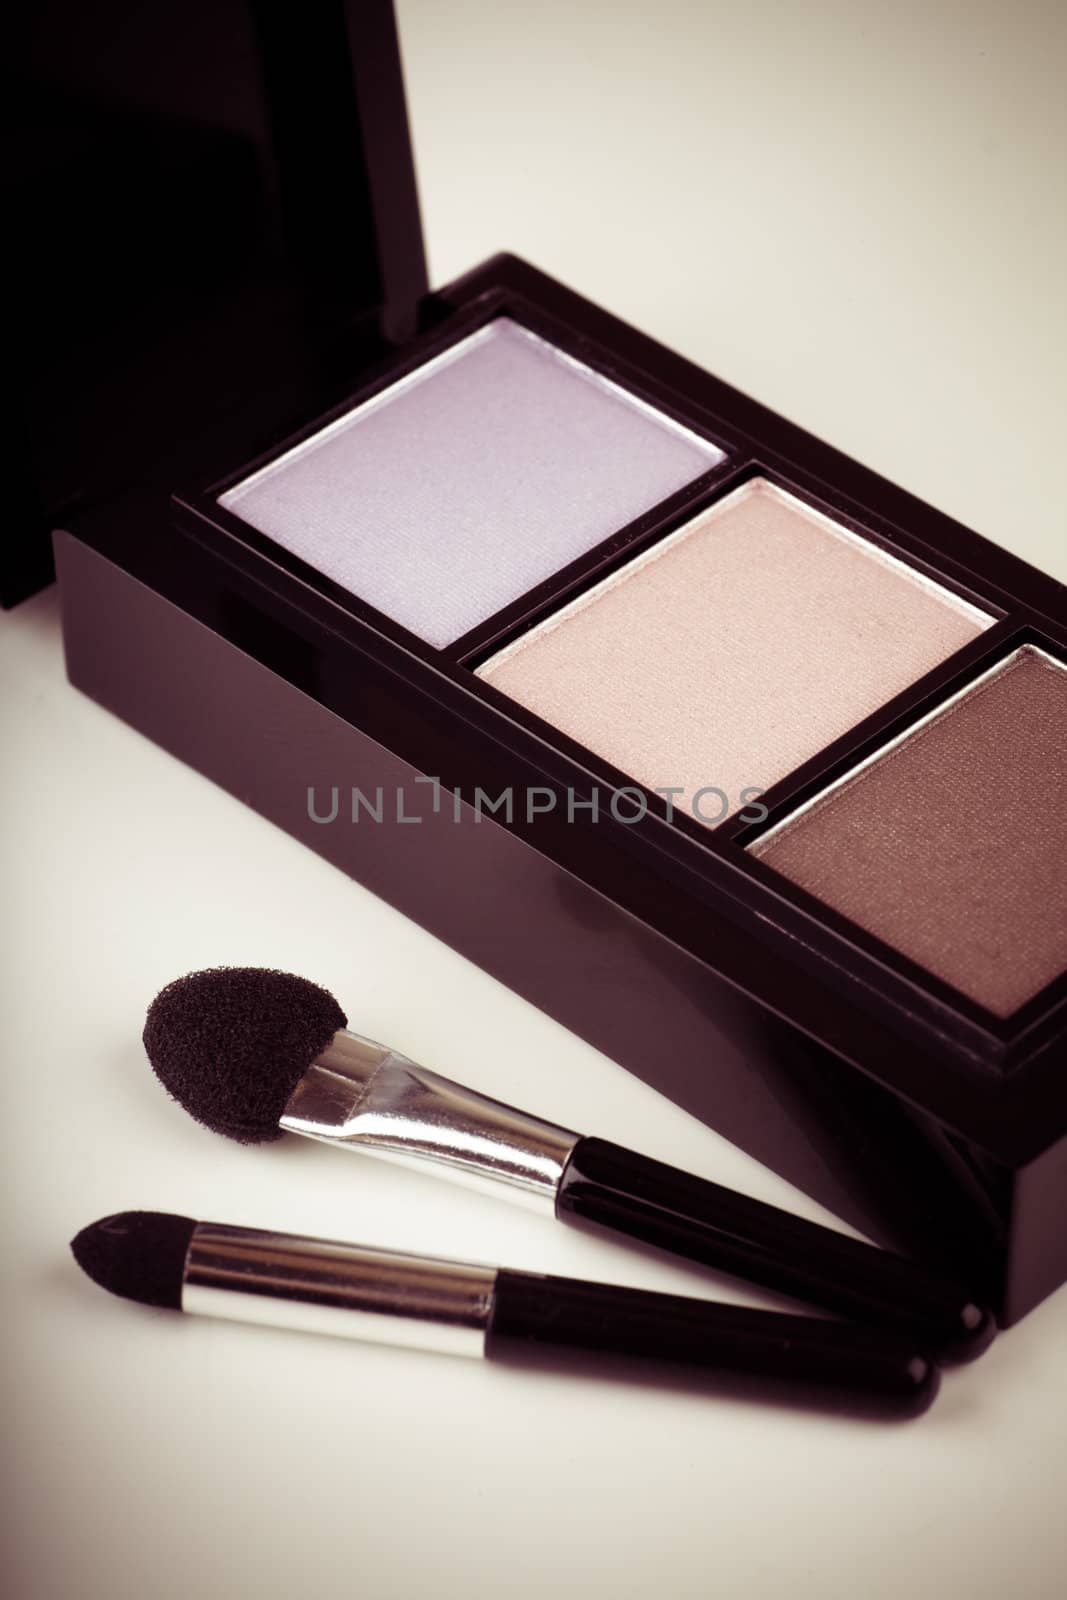 Closeup view of eye shadows with three colors. Toned image